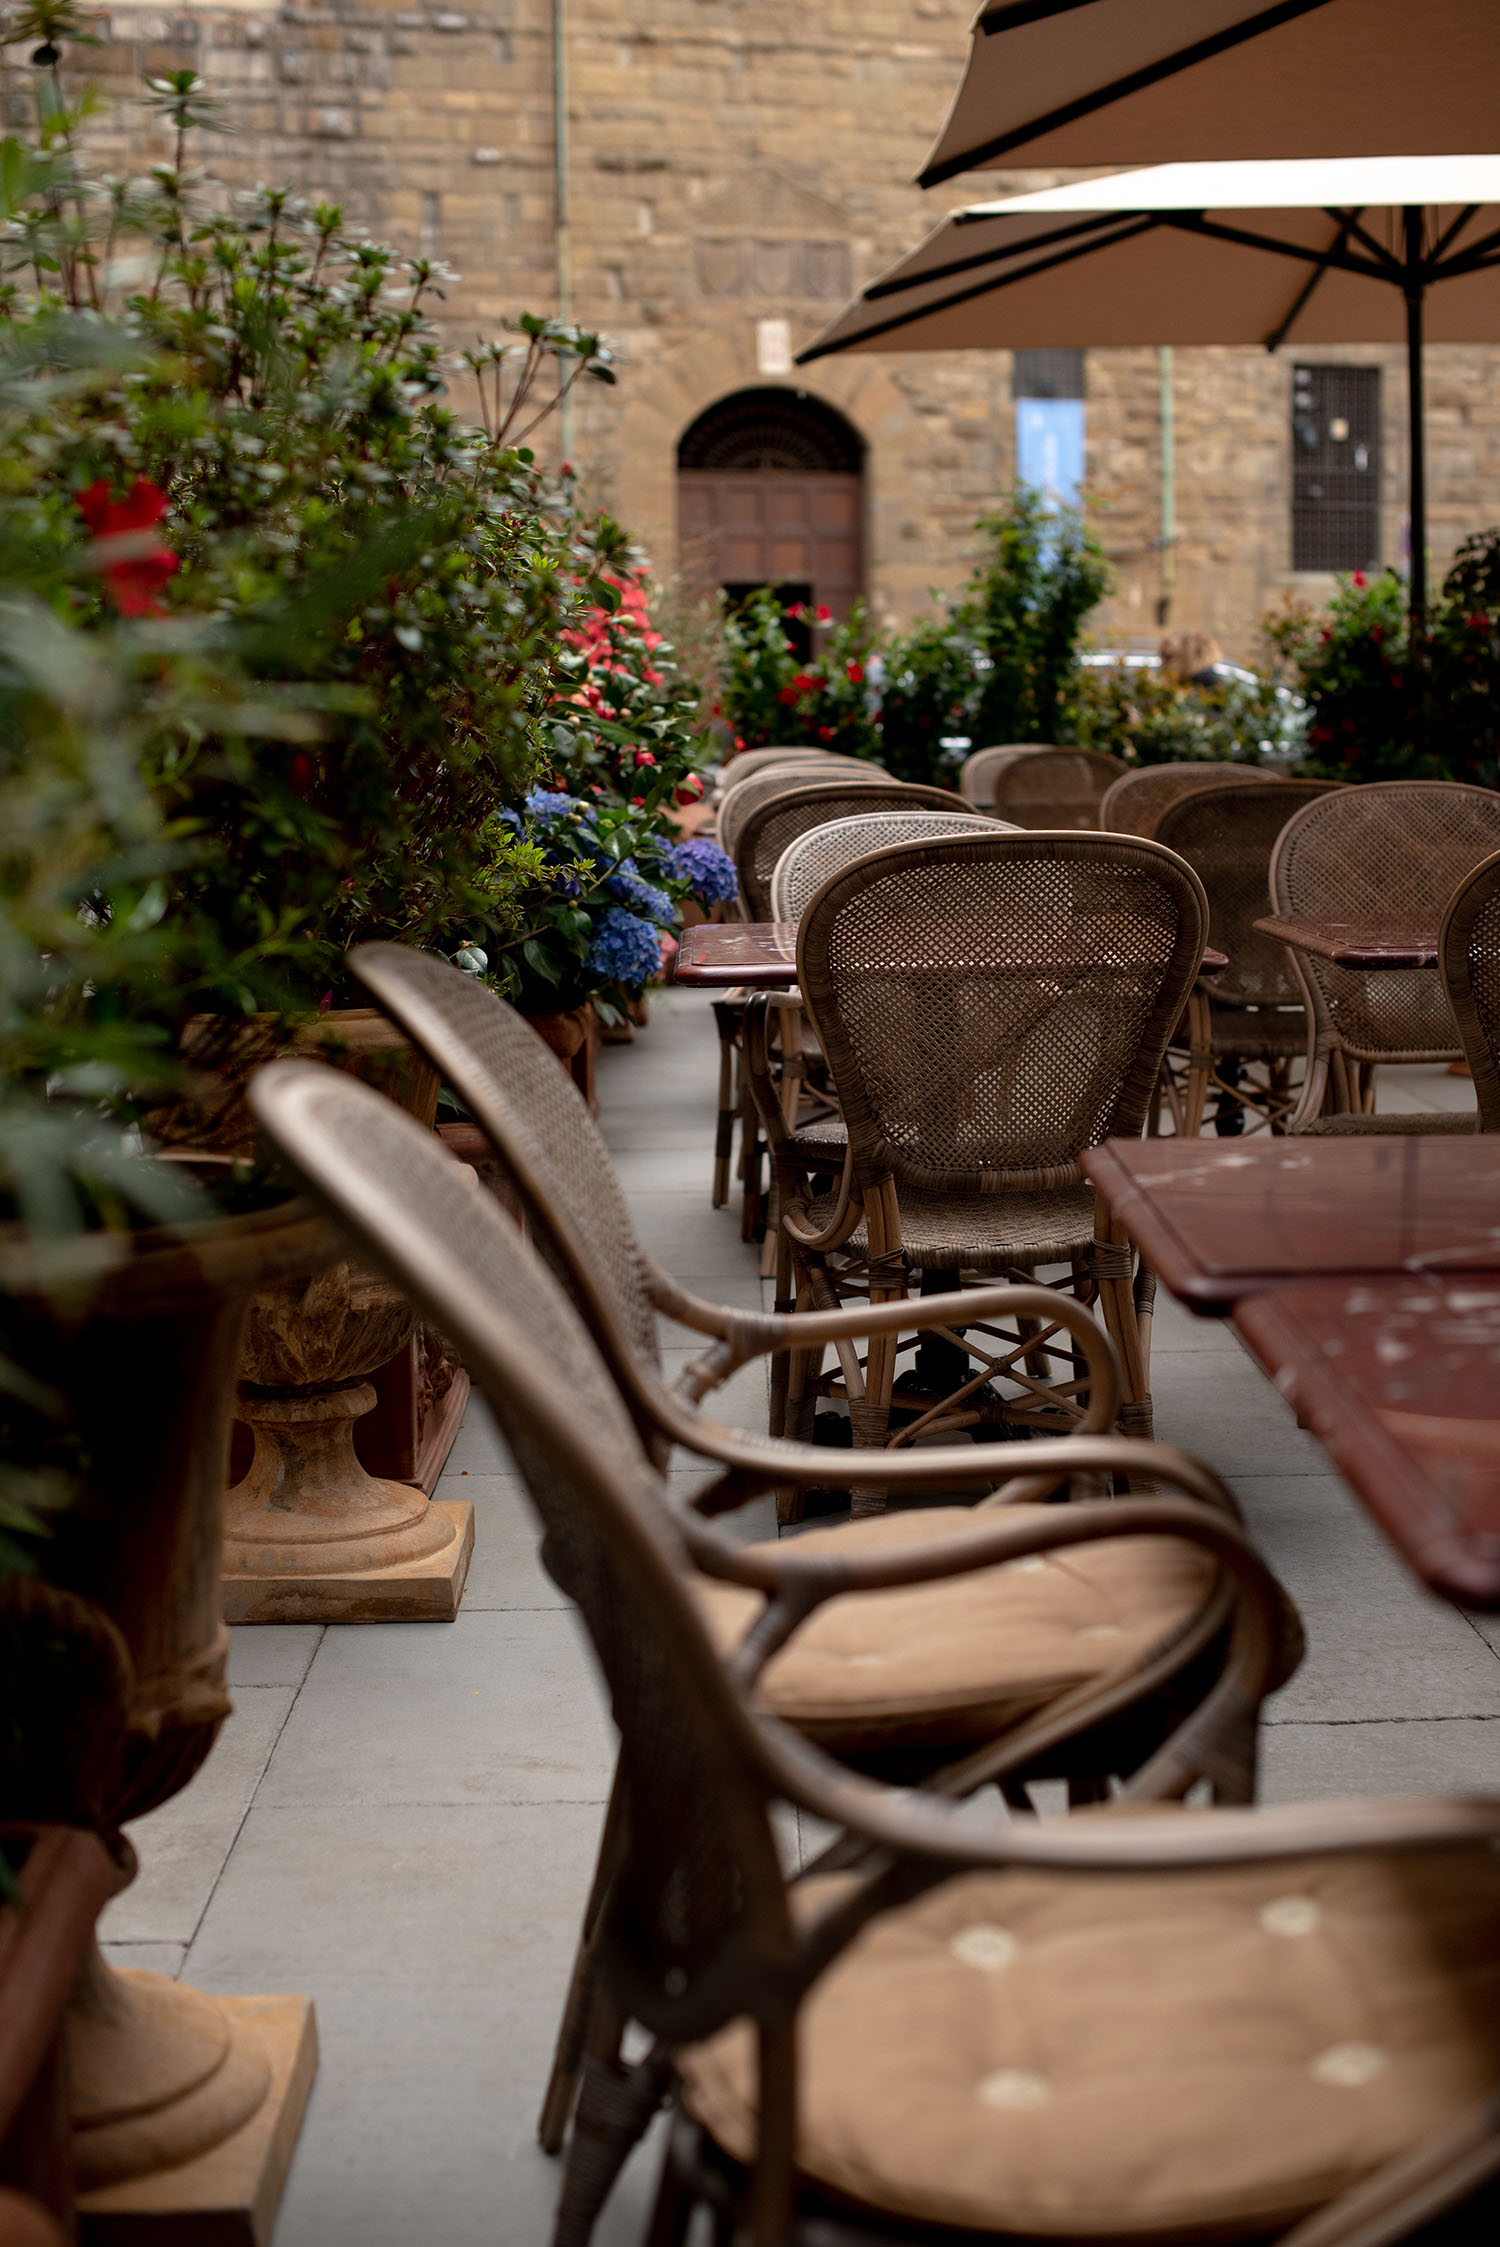 Coco & Vera - Brown chairs at Gucci Giardino 25 restaurant in Florence